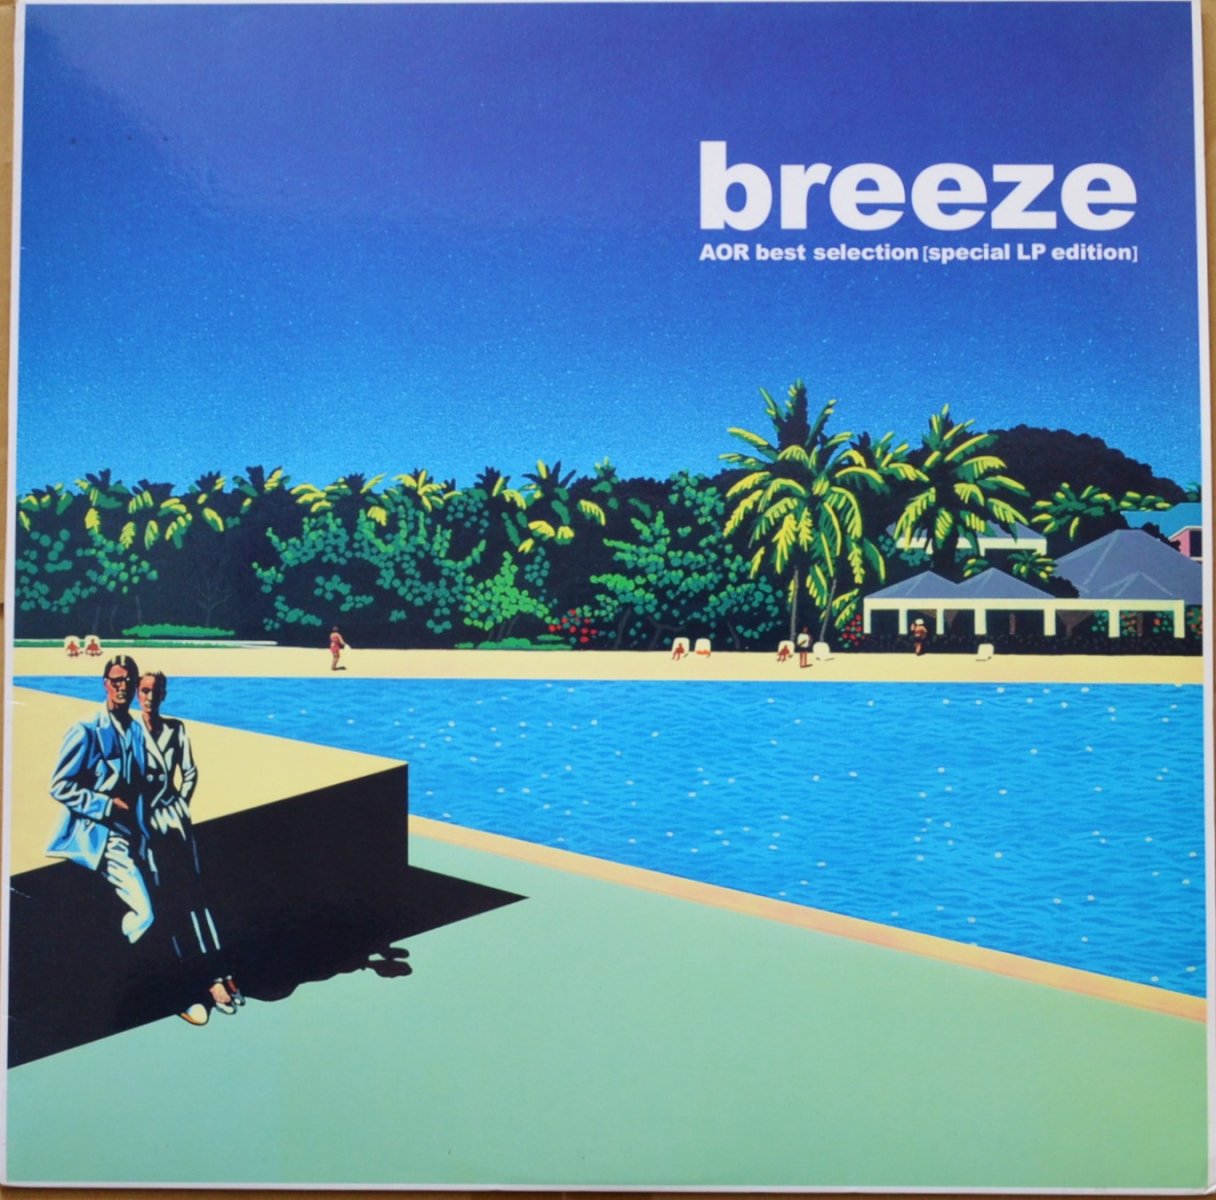 V.A. (MACKEY FEARY BAND,BOBBY CALDWELL...) / BREEZE 〜AOR BEST SELECTION (SPECIAL LP EDITION) (LP)